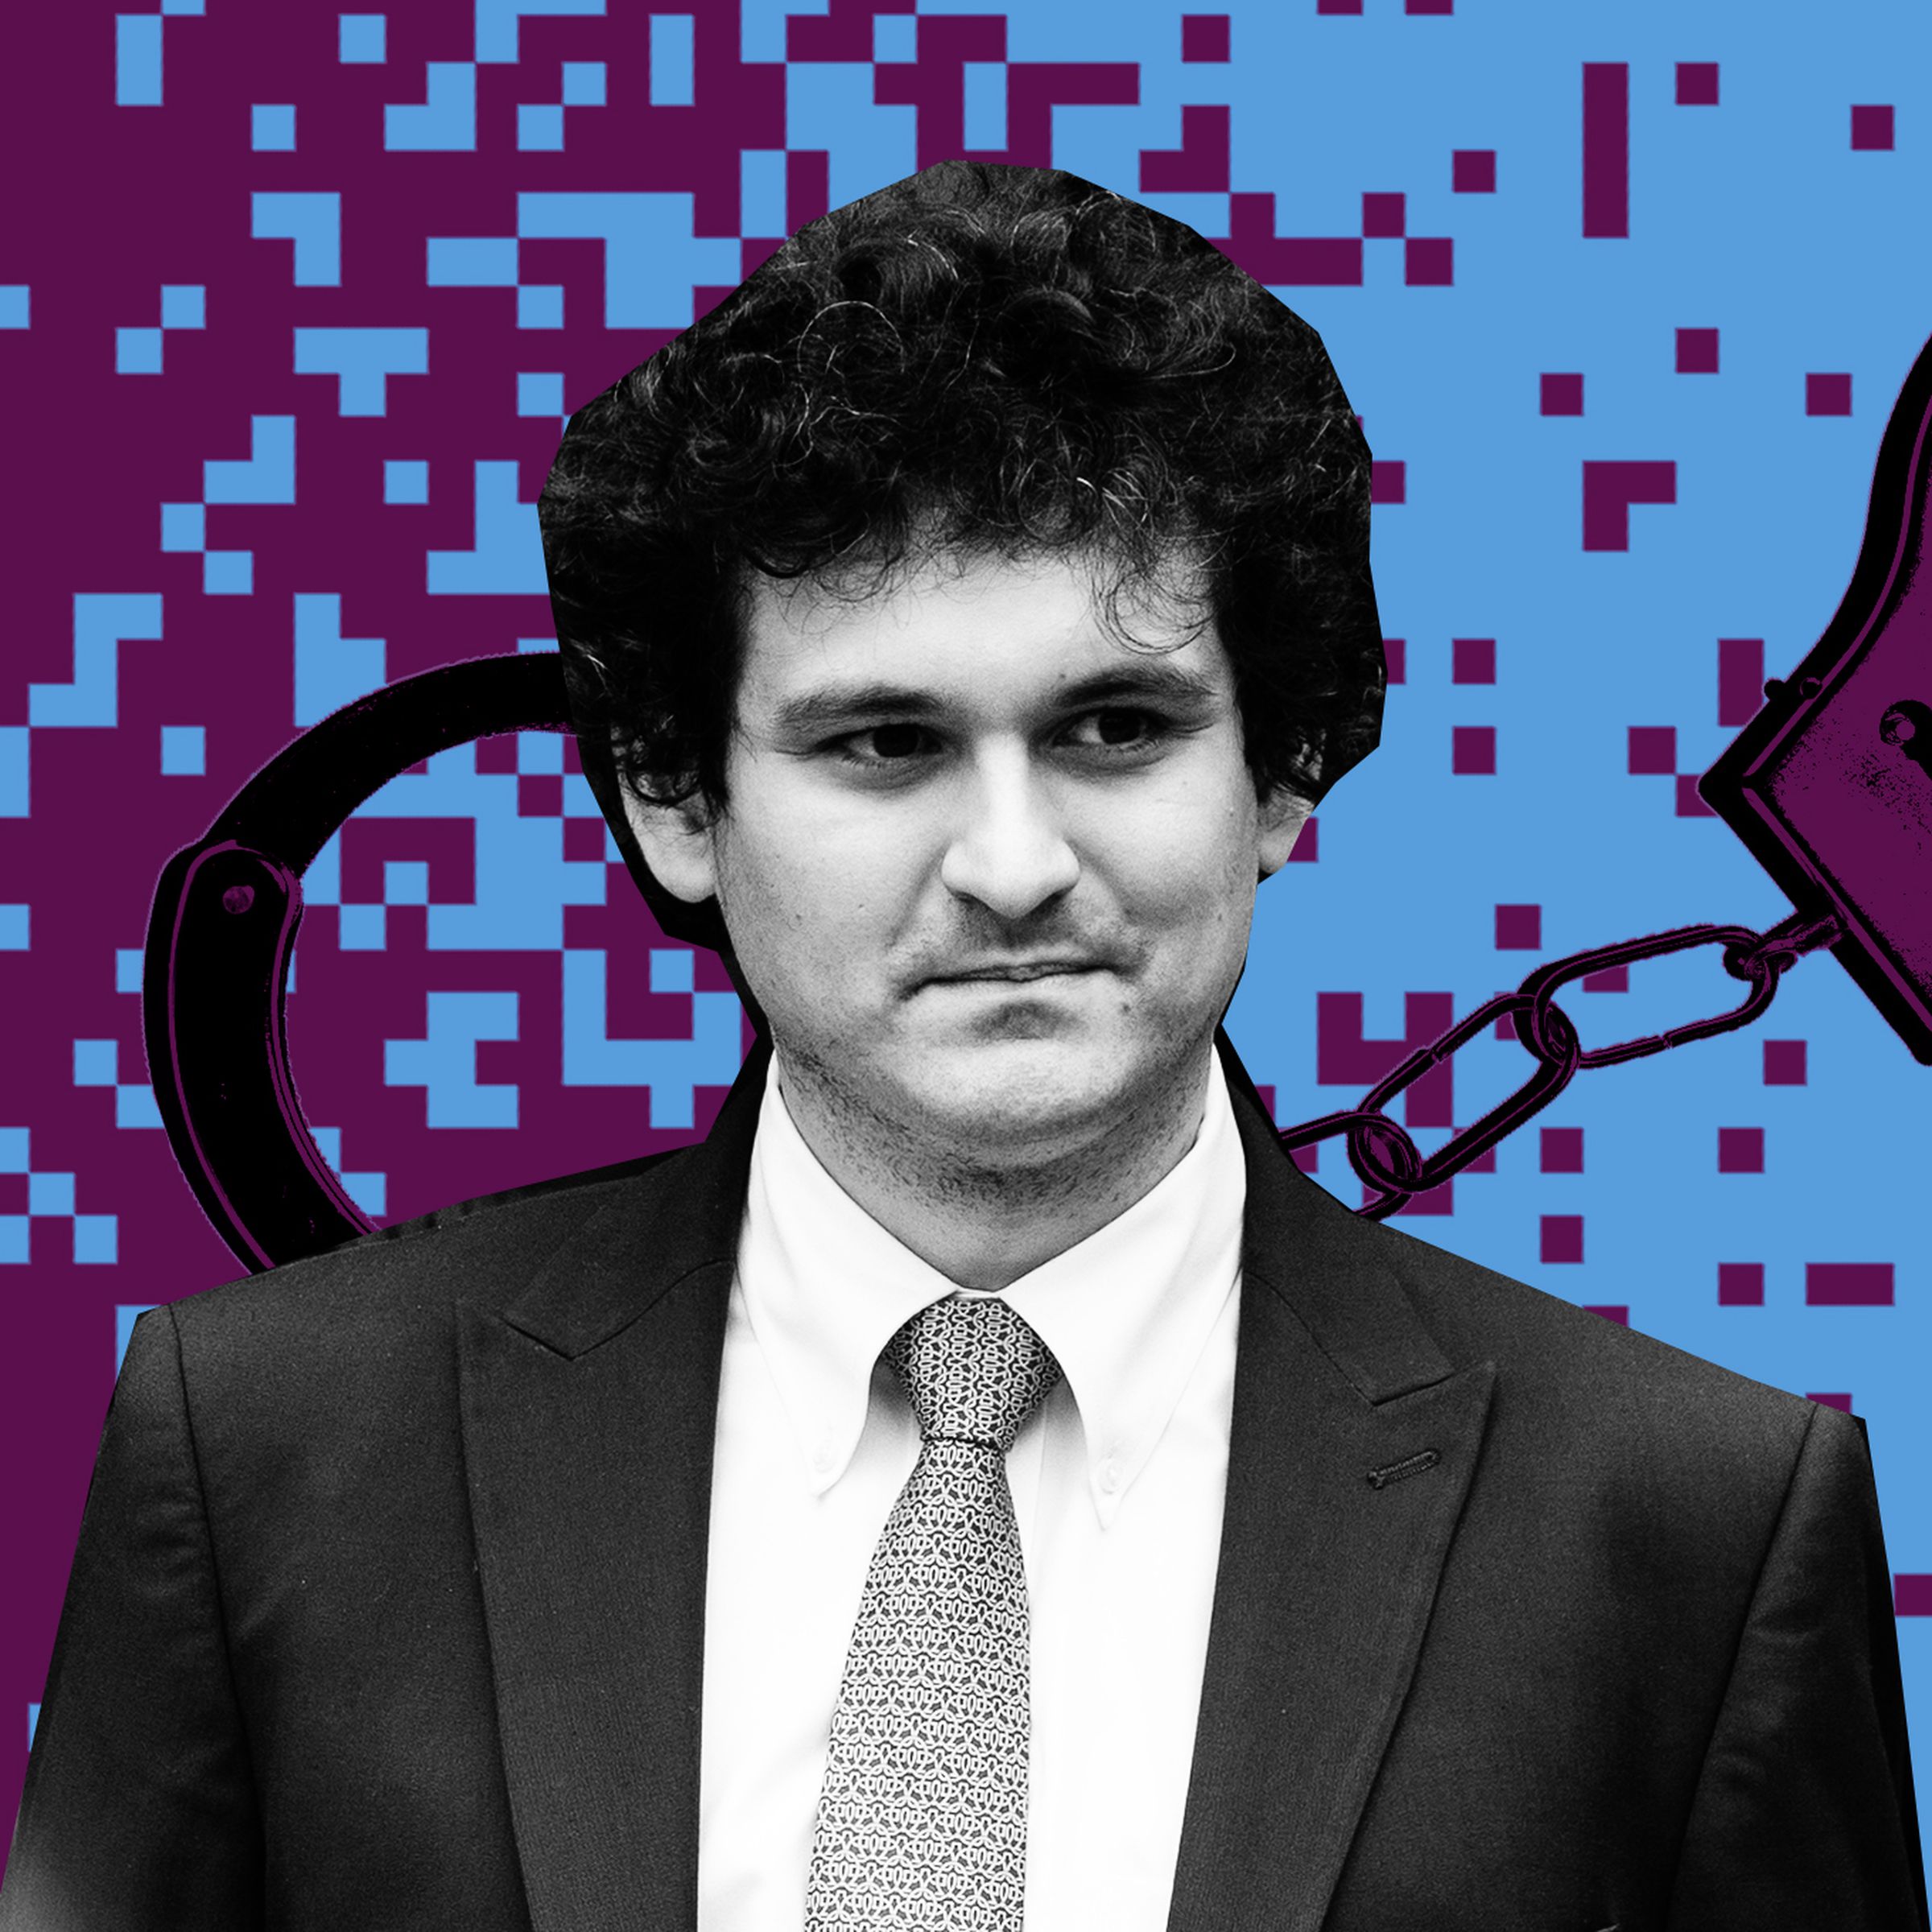 Photo Illustration of Sam Bankman-Fried in front of a graphic background of pixels and handcuffs.